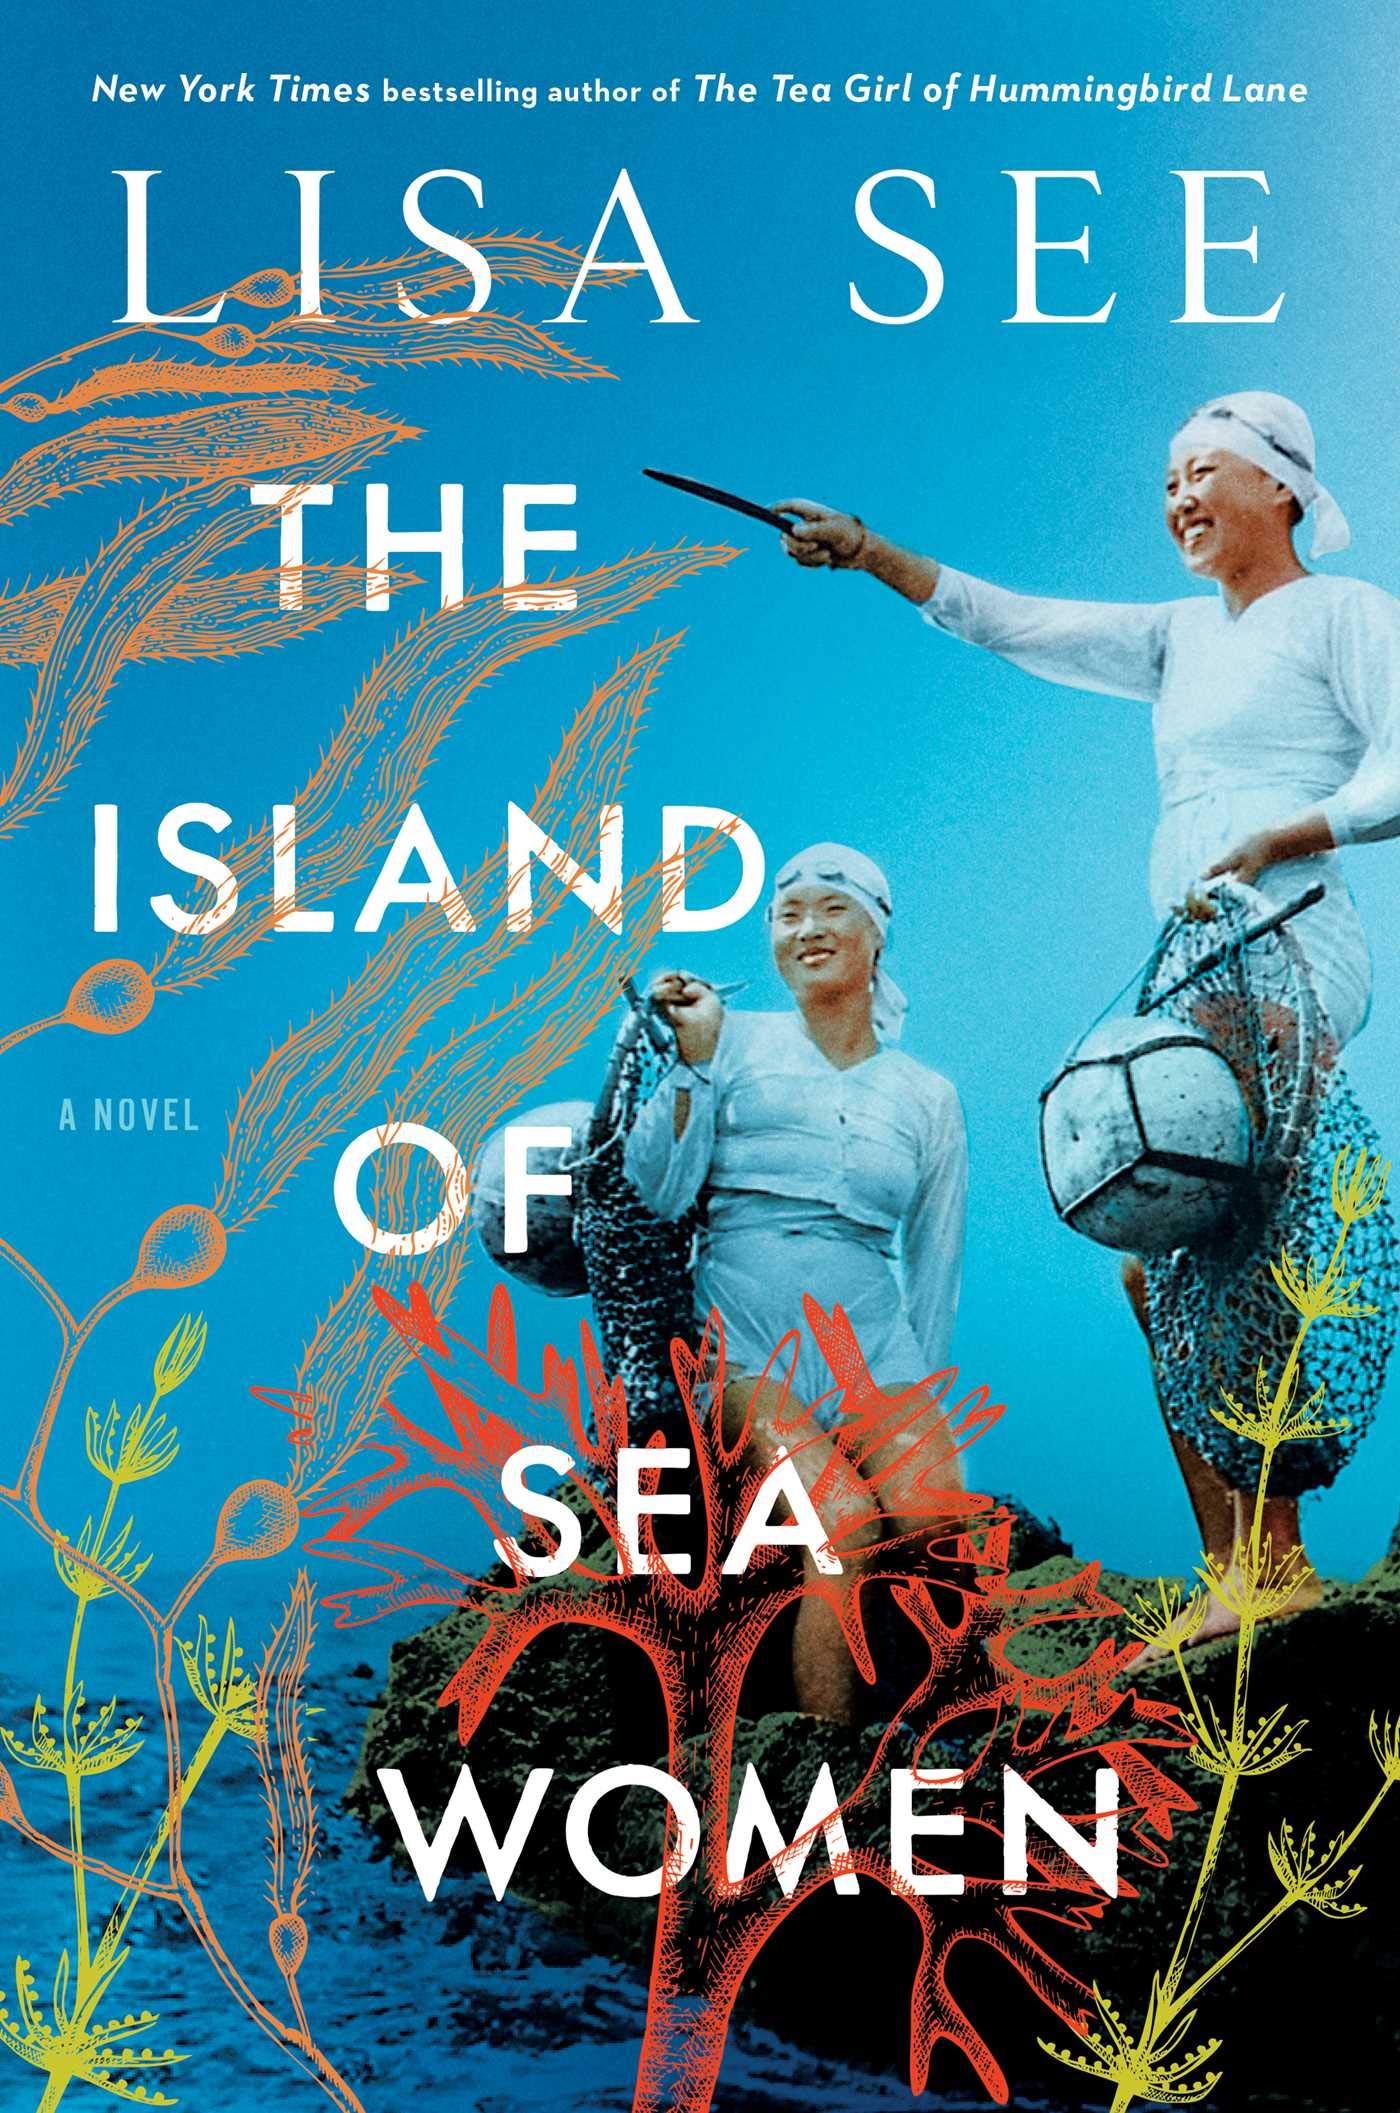 Image for "The Island of Sea Women"